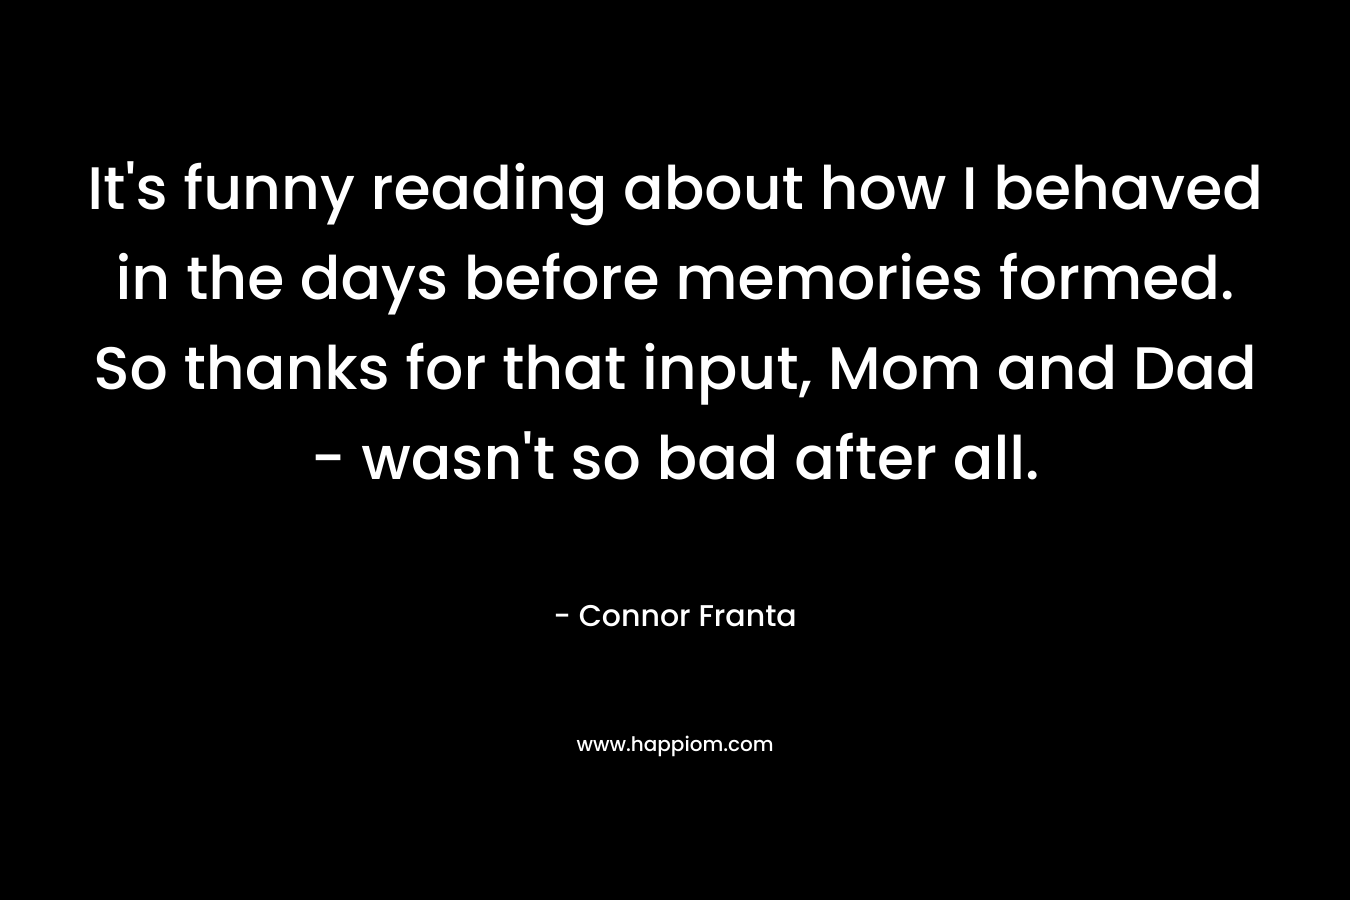 It’s funny reading about how I behaved in the days before memories formed. So thanks for that input, Mom and Dad – wasn’t so bad after all. – Connor Franta